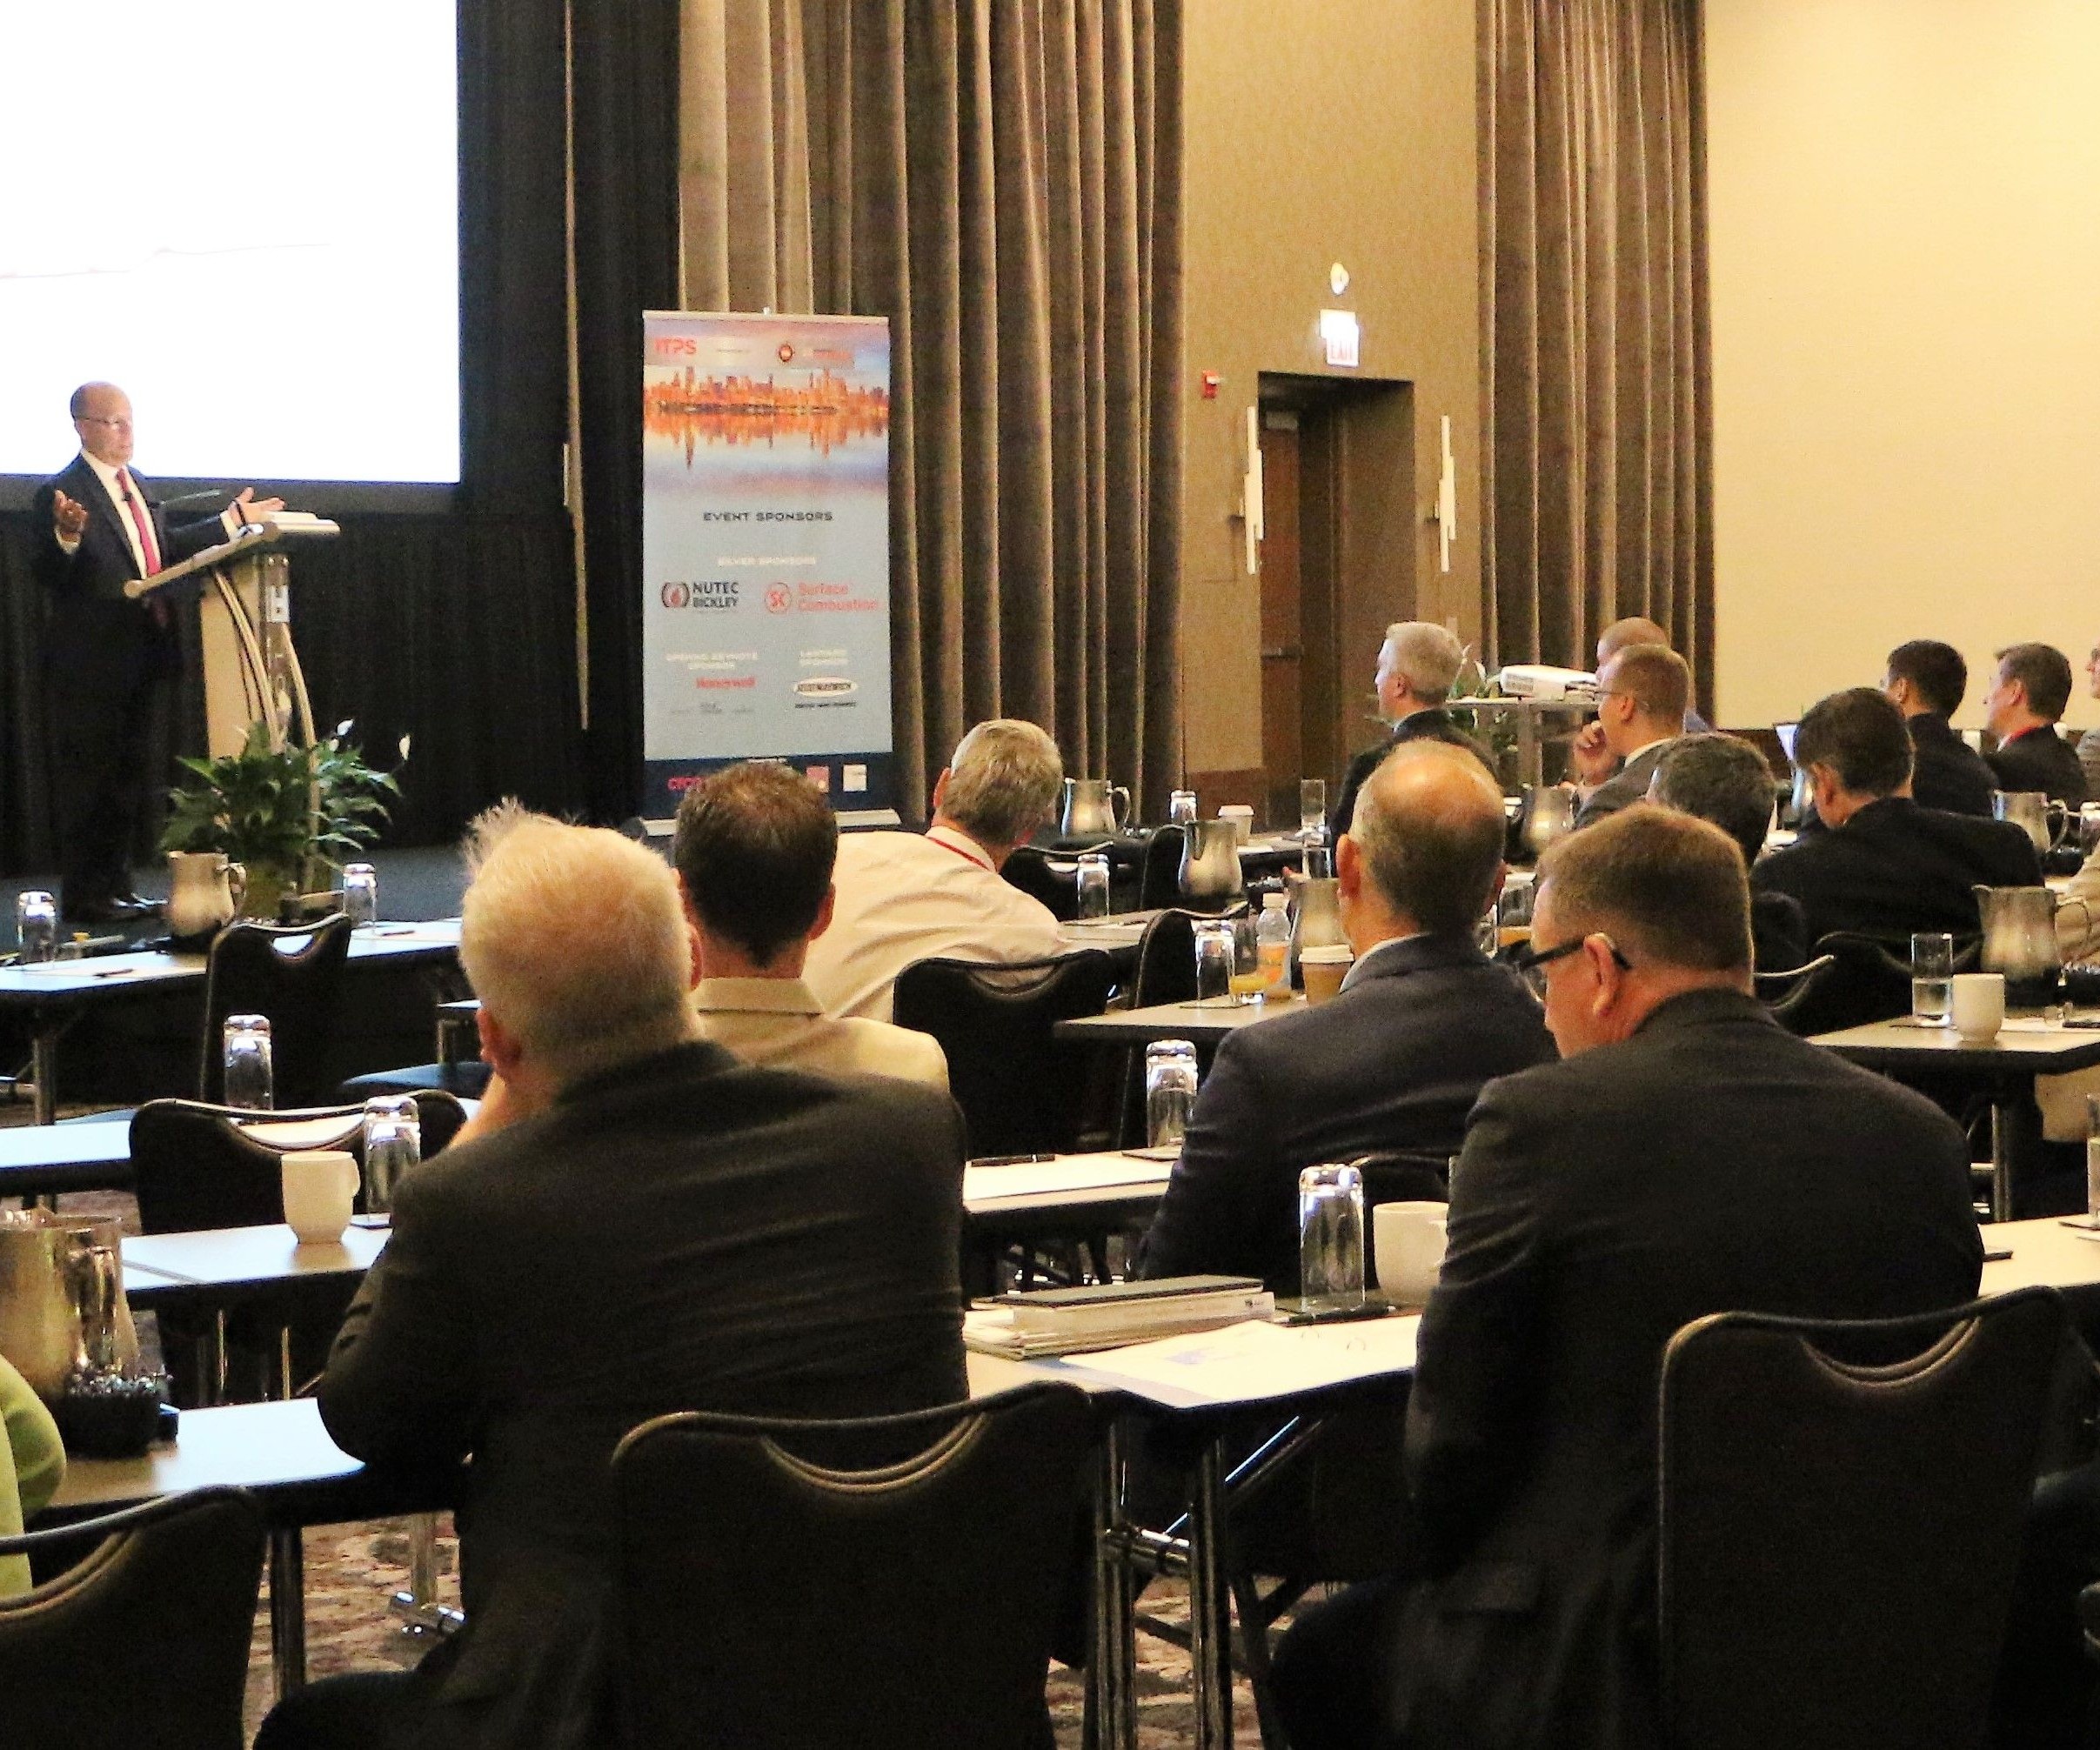 Preview the International Finishing and Coating Summit